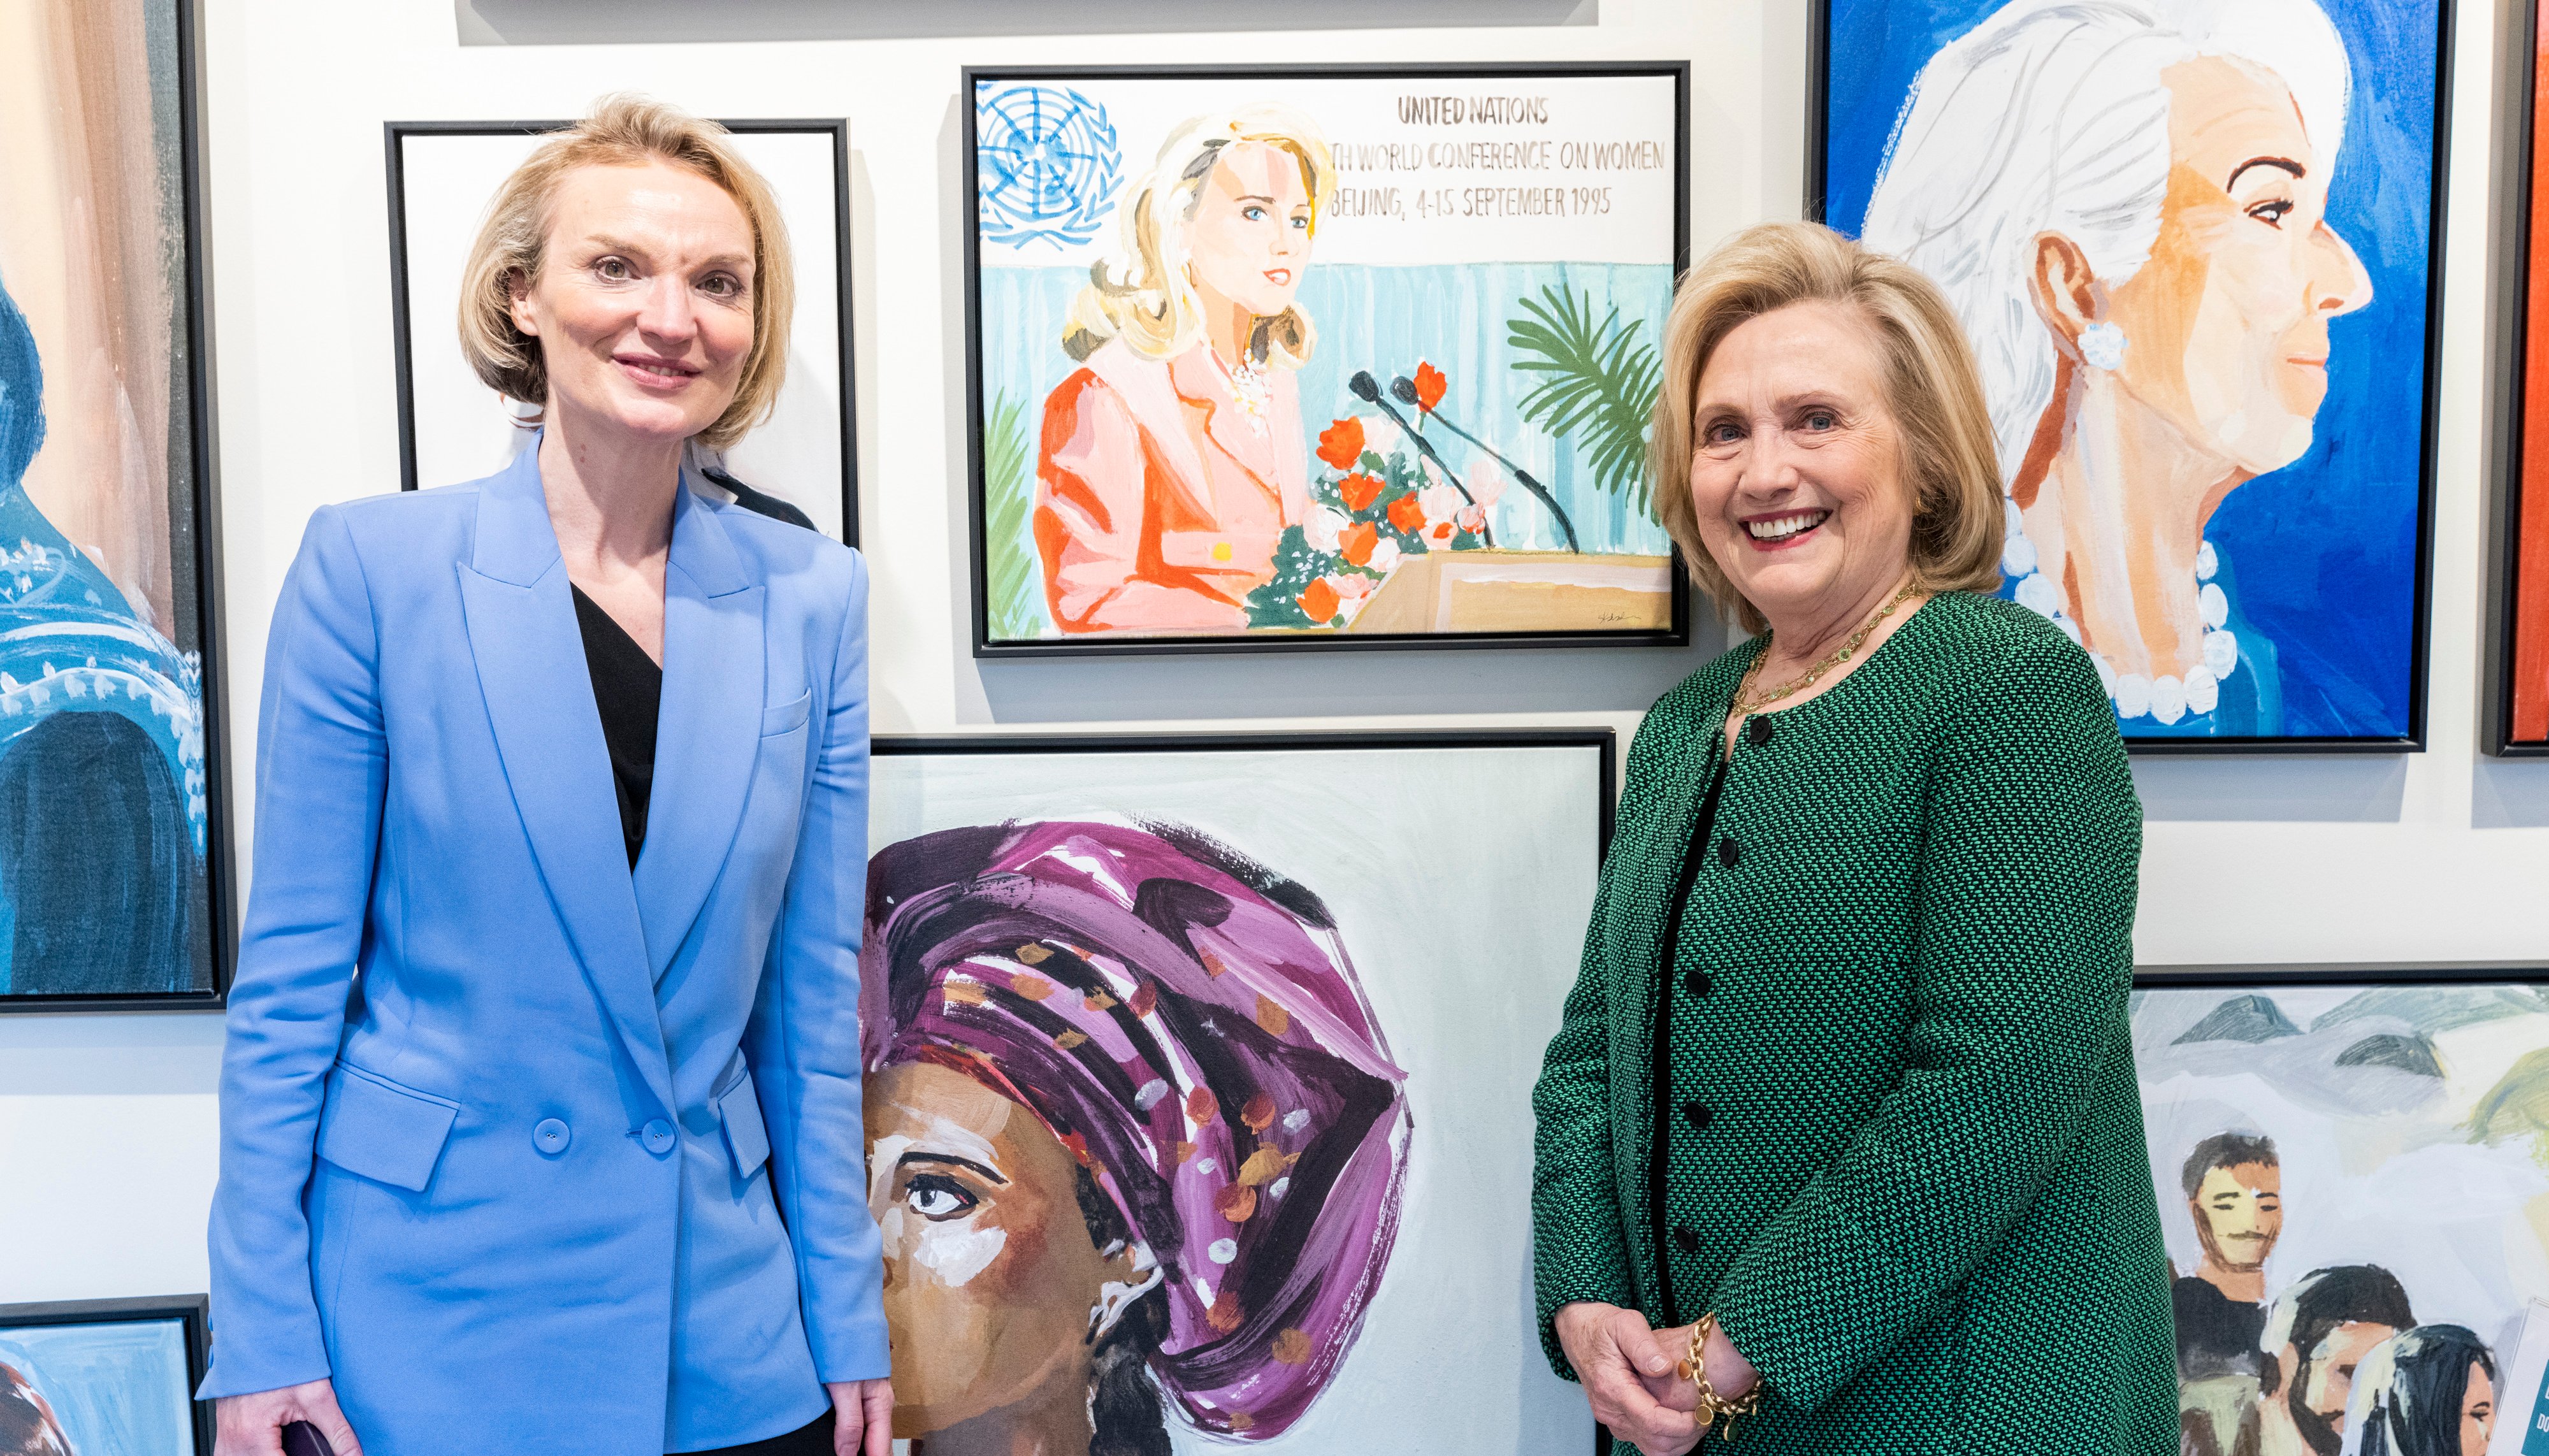 Read A Special Lunch with Secretary Hillary Rodham Clinton by Vital Voices